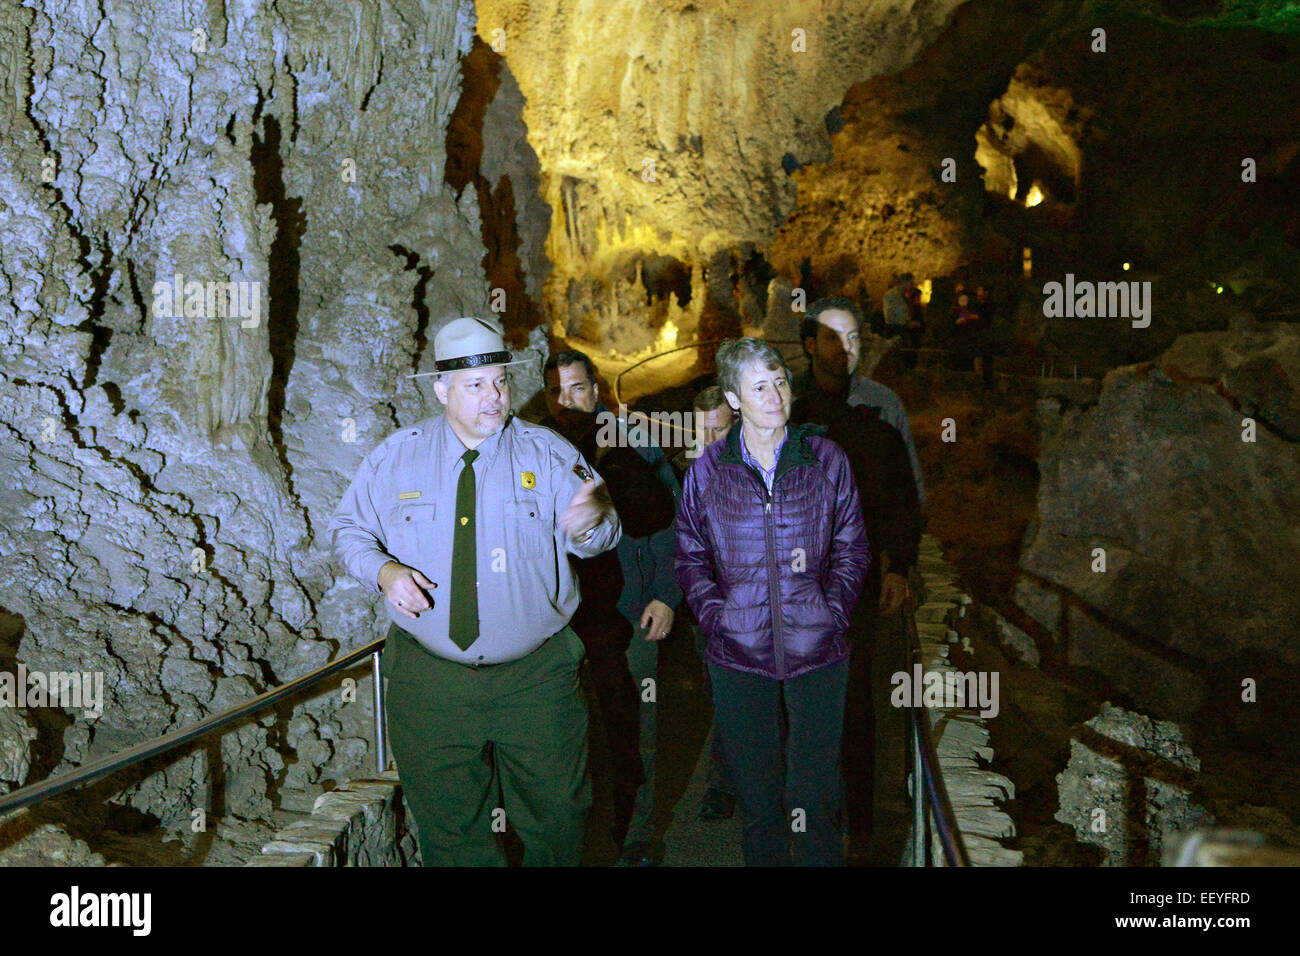 US Interior Secretary Sally Jewell tours Carlsbad Caverns National Park during a visit to the region January 22, 2015 in Carlsbad, New Mexico. Stock Photo